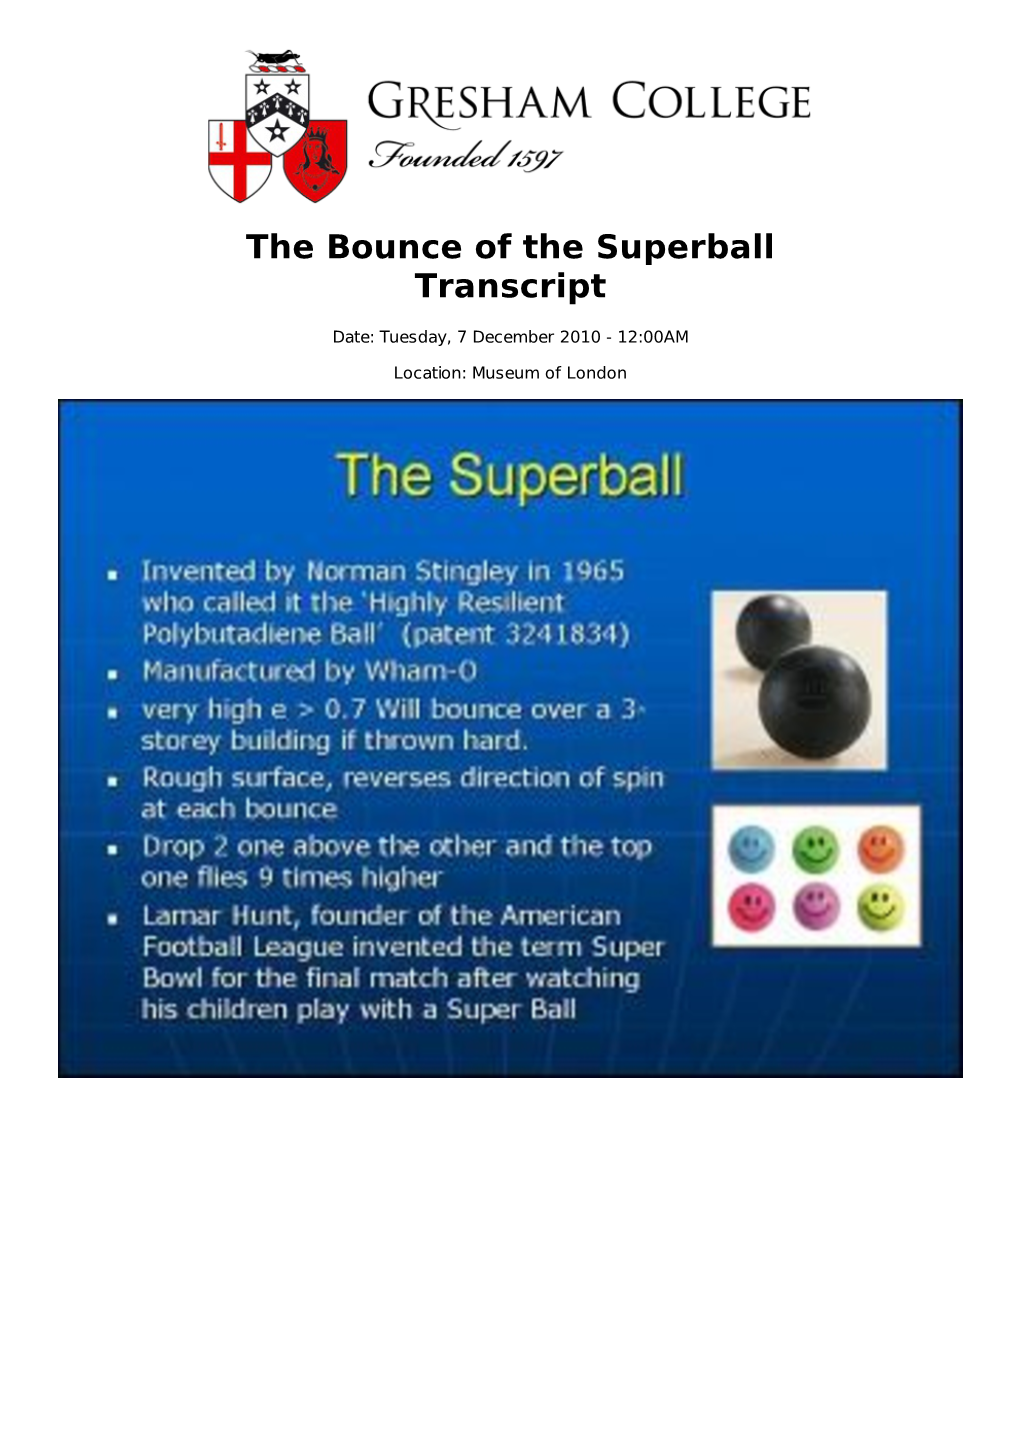 The Bounce of the Superball Transcript